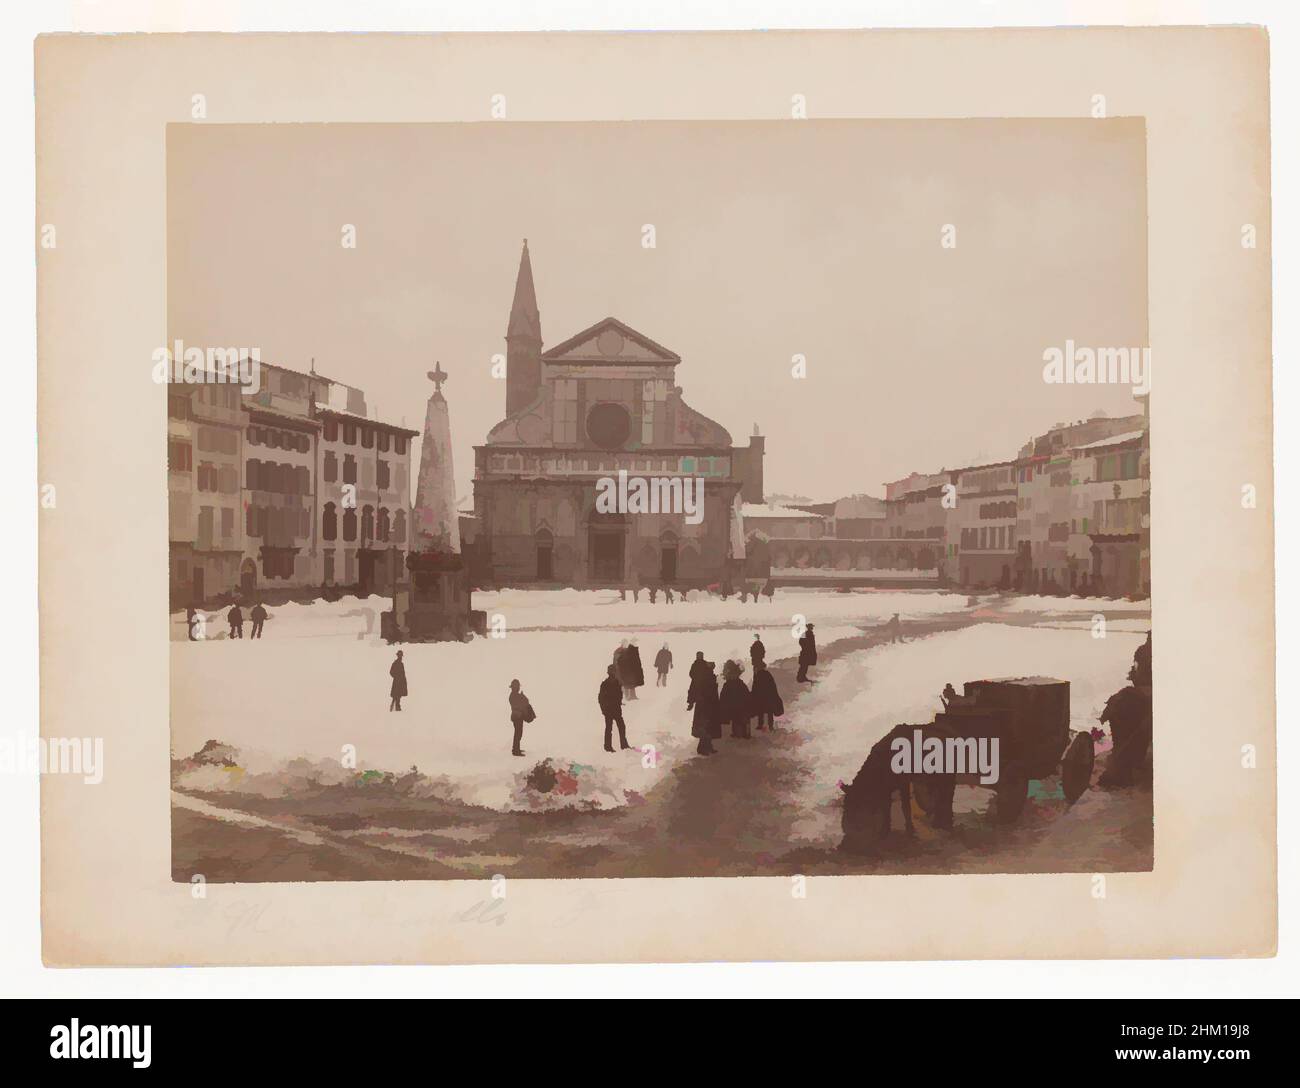 Art inspired by Exterior of the Santa Maria Novella in Florence, Italy, St Maria Novella, Firenze, Bartolomeo Ammannati, Florence, 1851 - 1900, cardboard, paper, albumen print, height 241 mm × width 321 mm, Classic works modernized by Artotop with a splash of modernity. Shapes, color and value, eye-catching visual impact on art. Emotions through freedom of artworks in a contemporary way. A timeless message pursuing a wildly creative new direction. Artists turning to the digital medium and creating the Artotop NFT Stock Photo